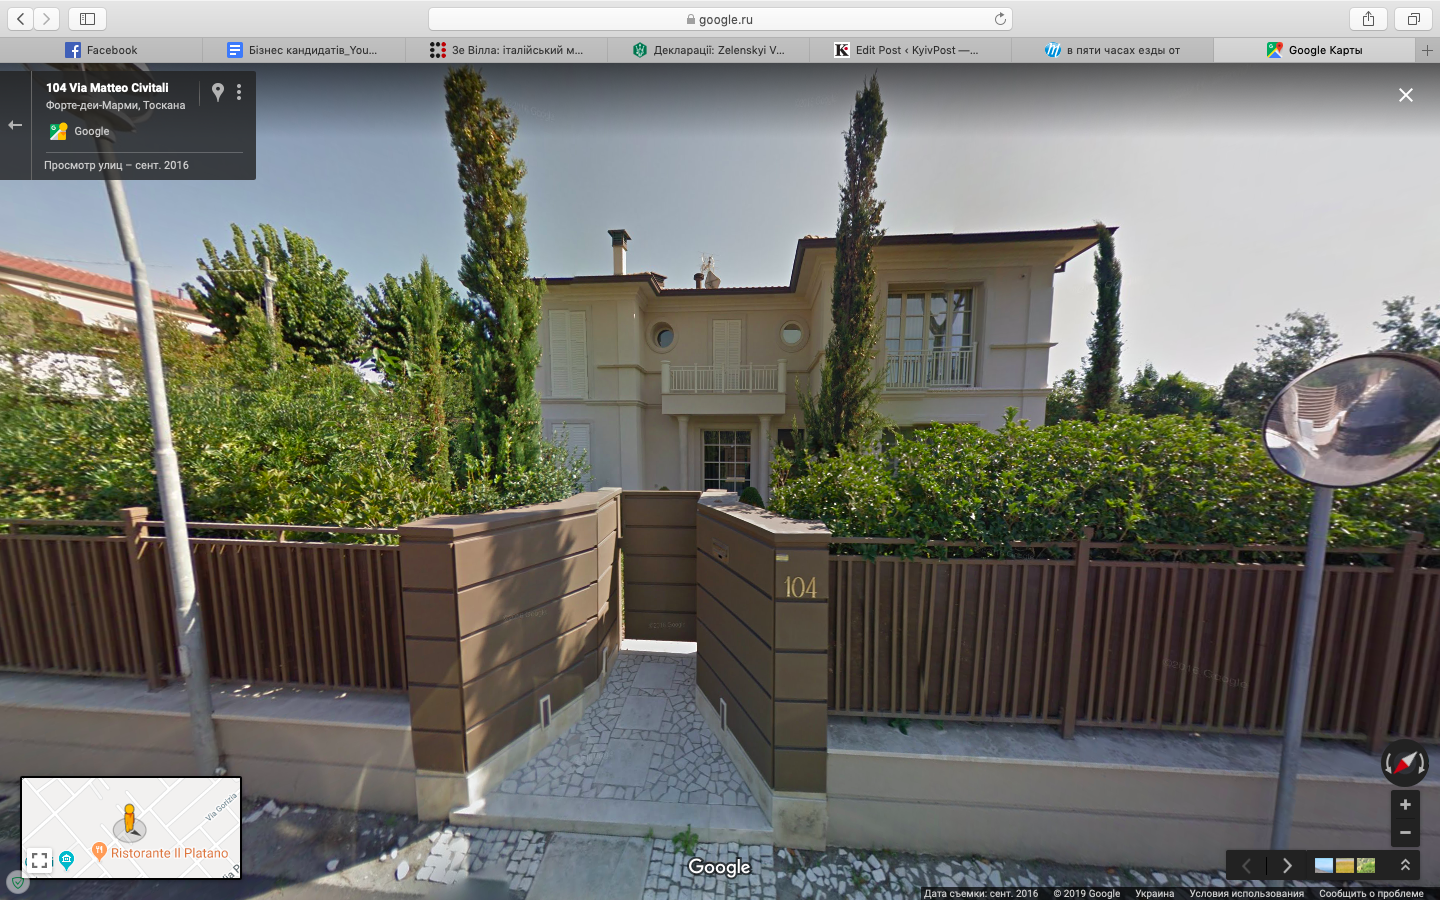 A Google Maps Street View image of a villa in the Italian resort town of Forte dei Marmi reportedly owned by Volodymyr Zelenskiy